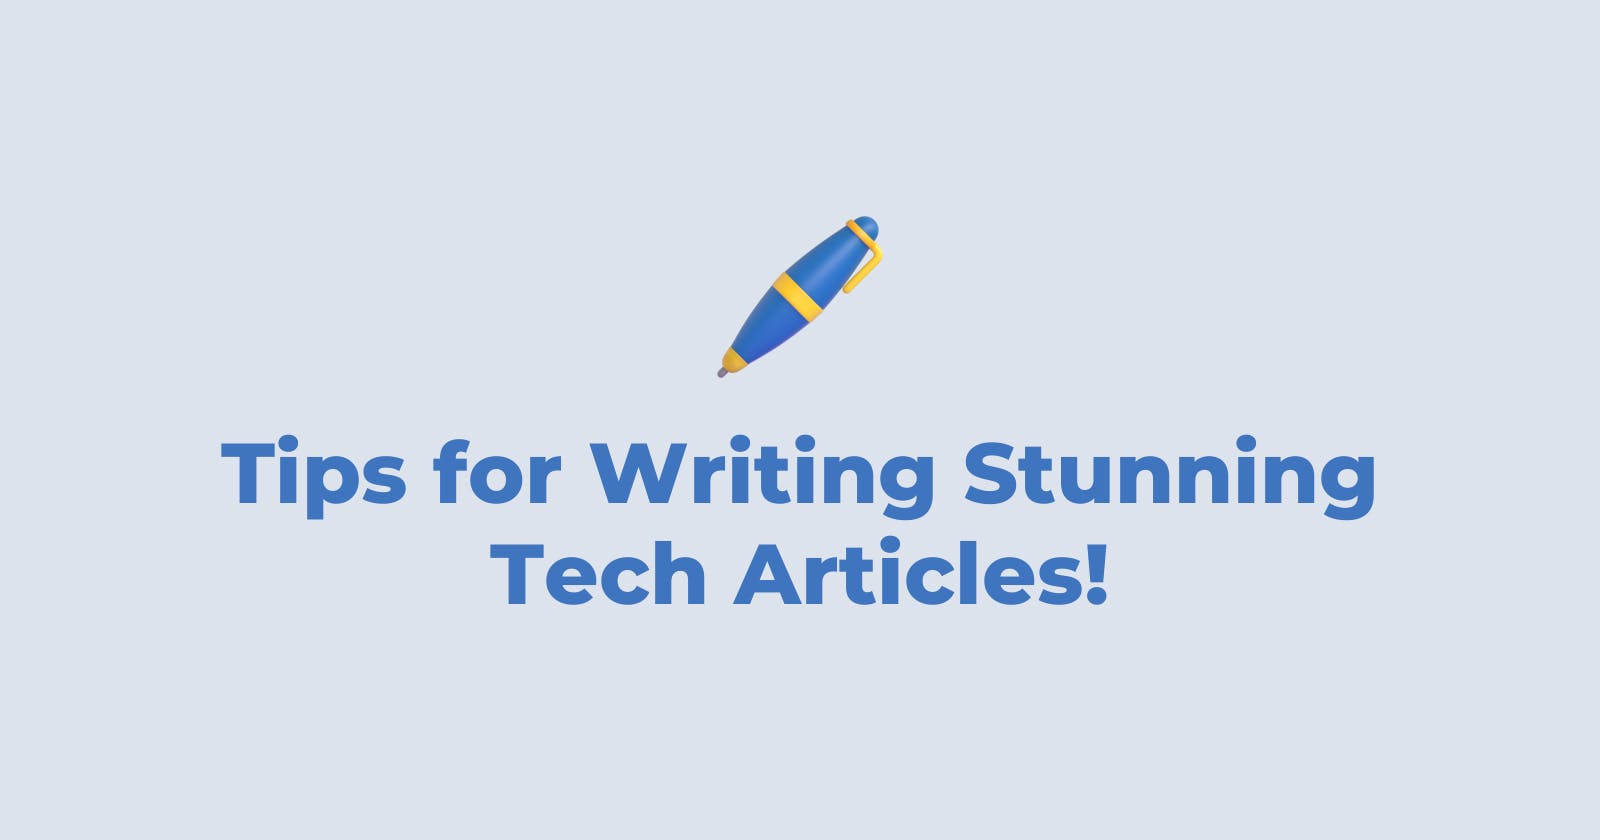 Tips for Writing Stunning Tech Articles!